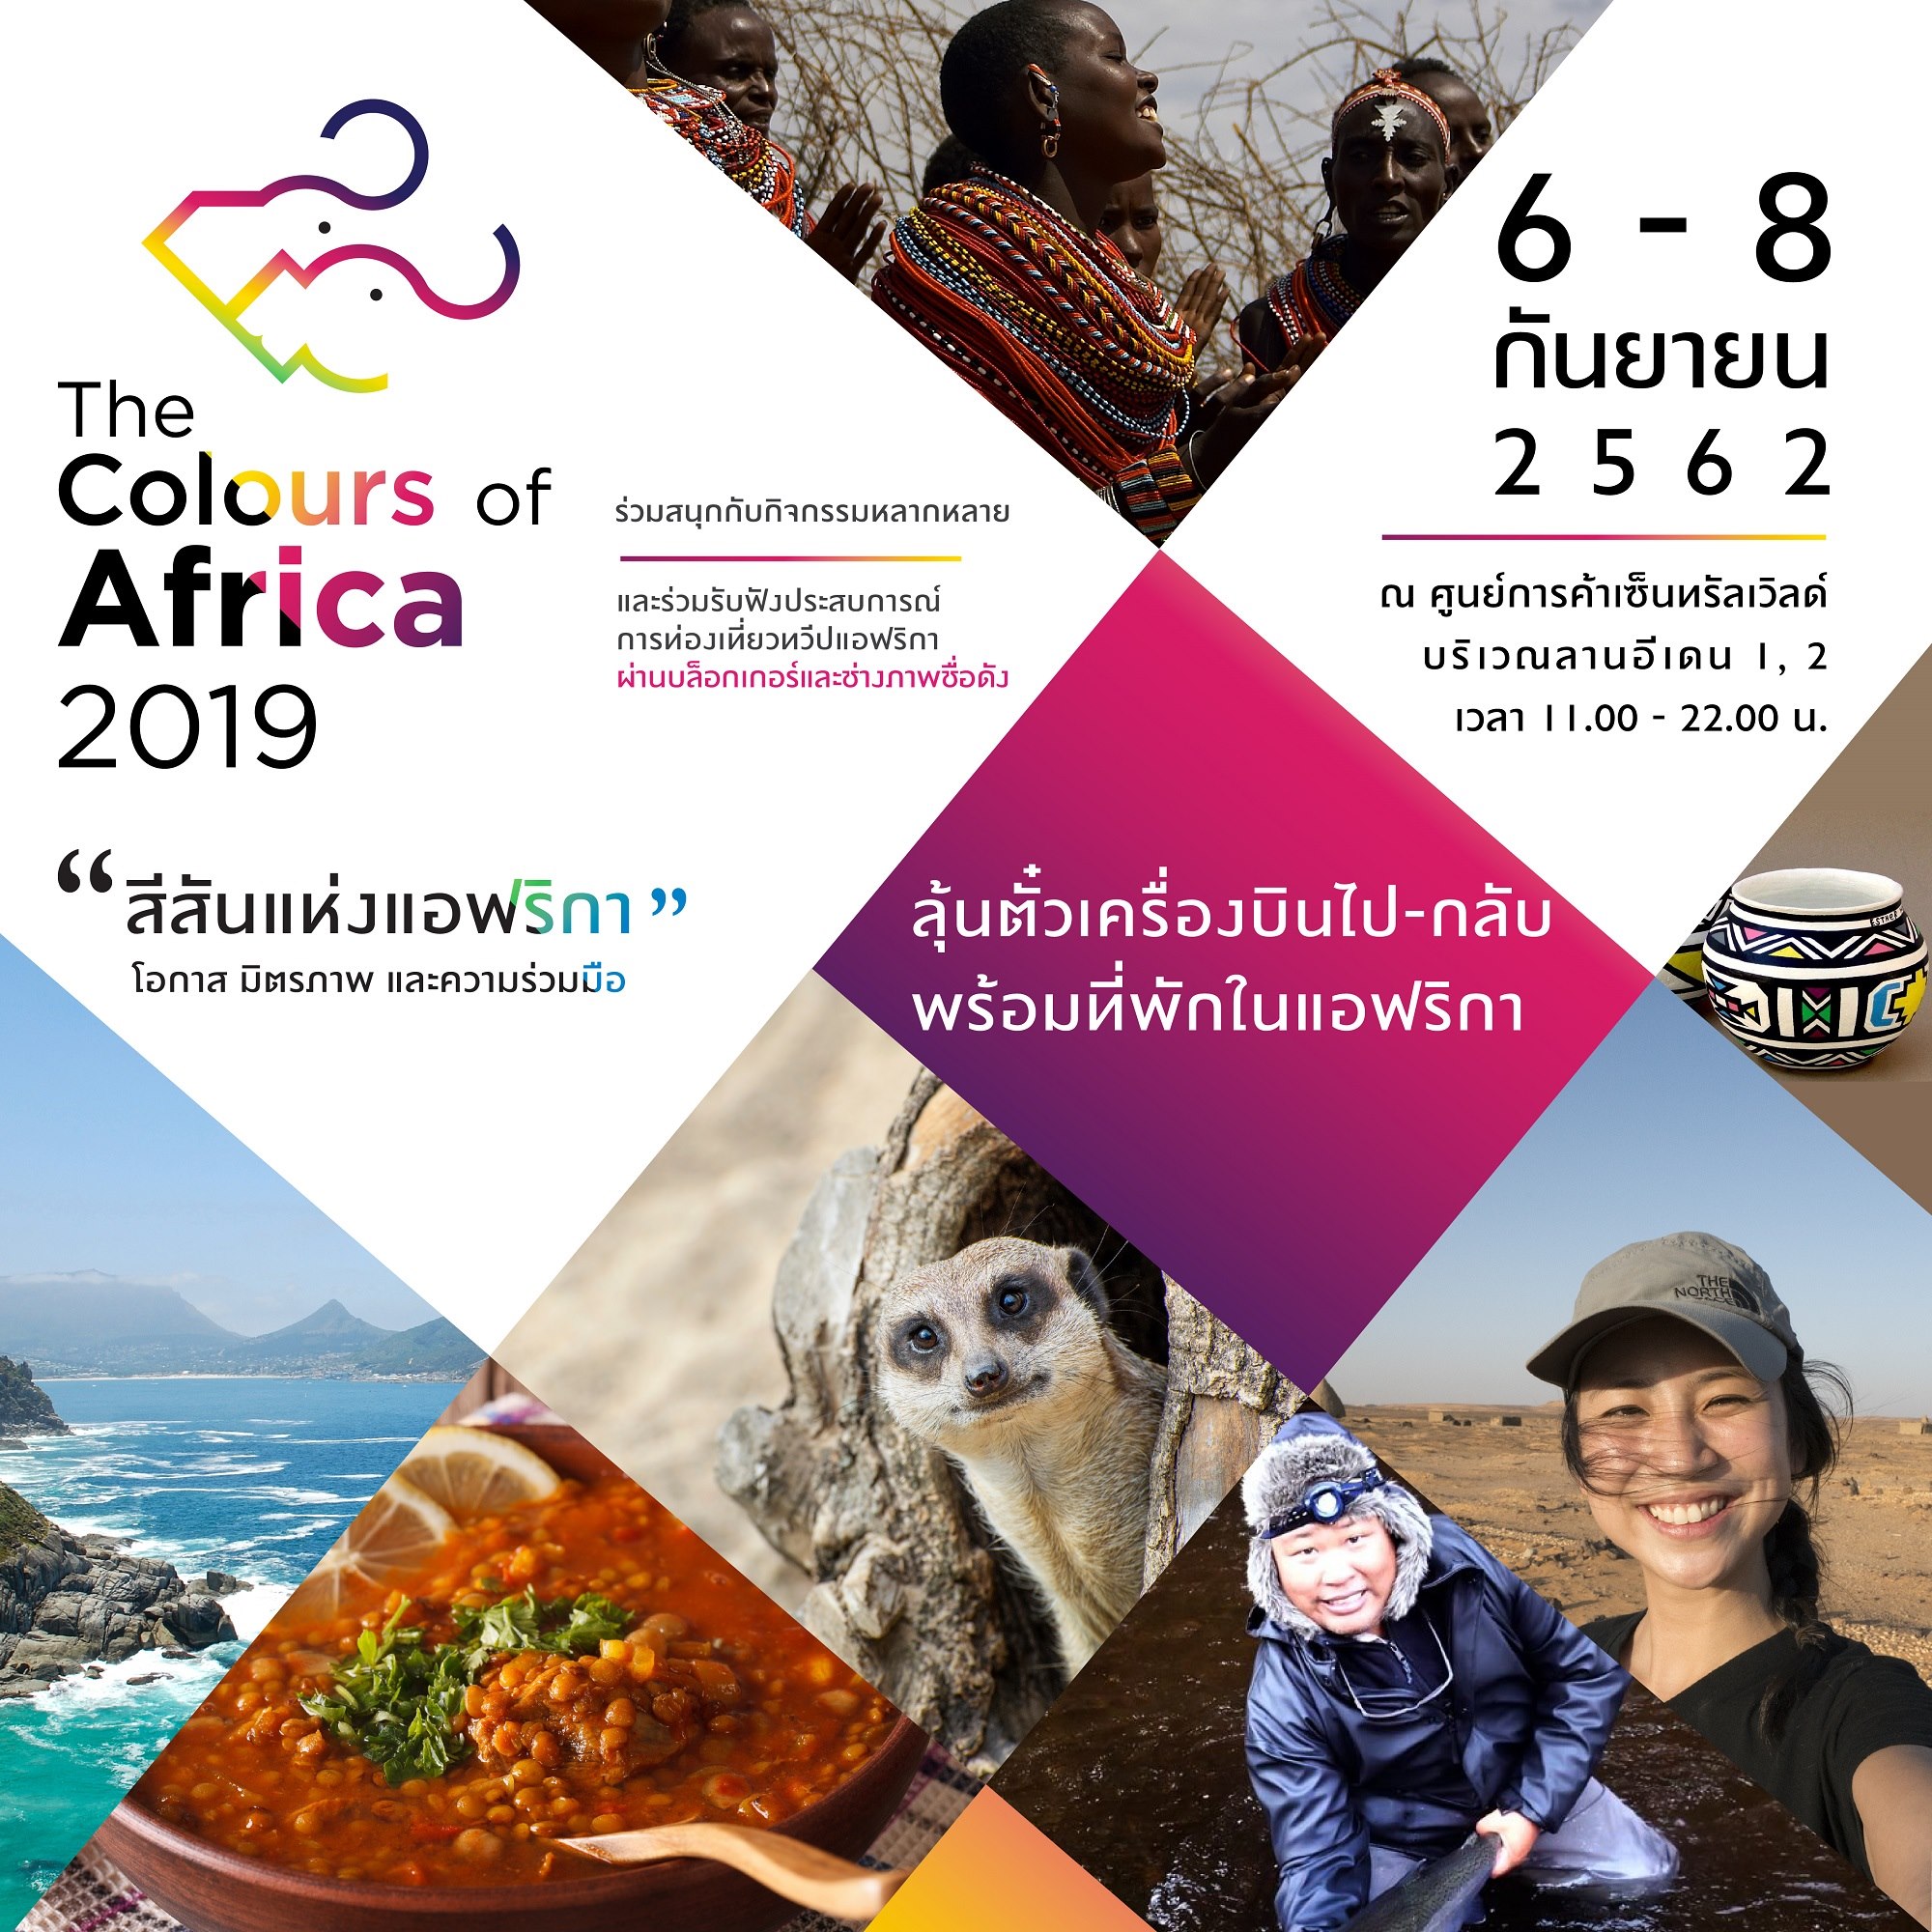 The Colours of Africa 2019